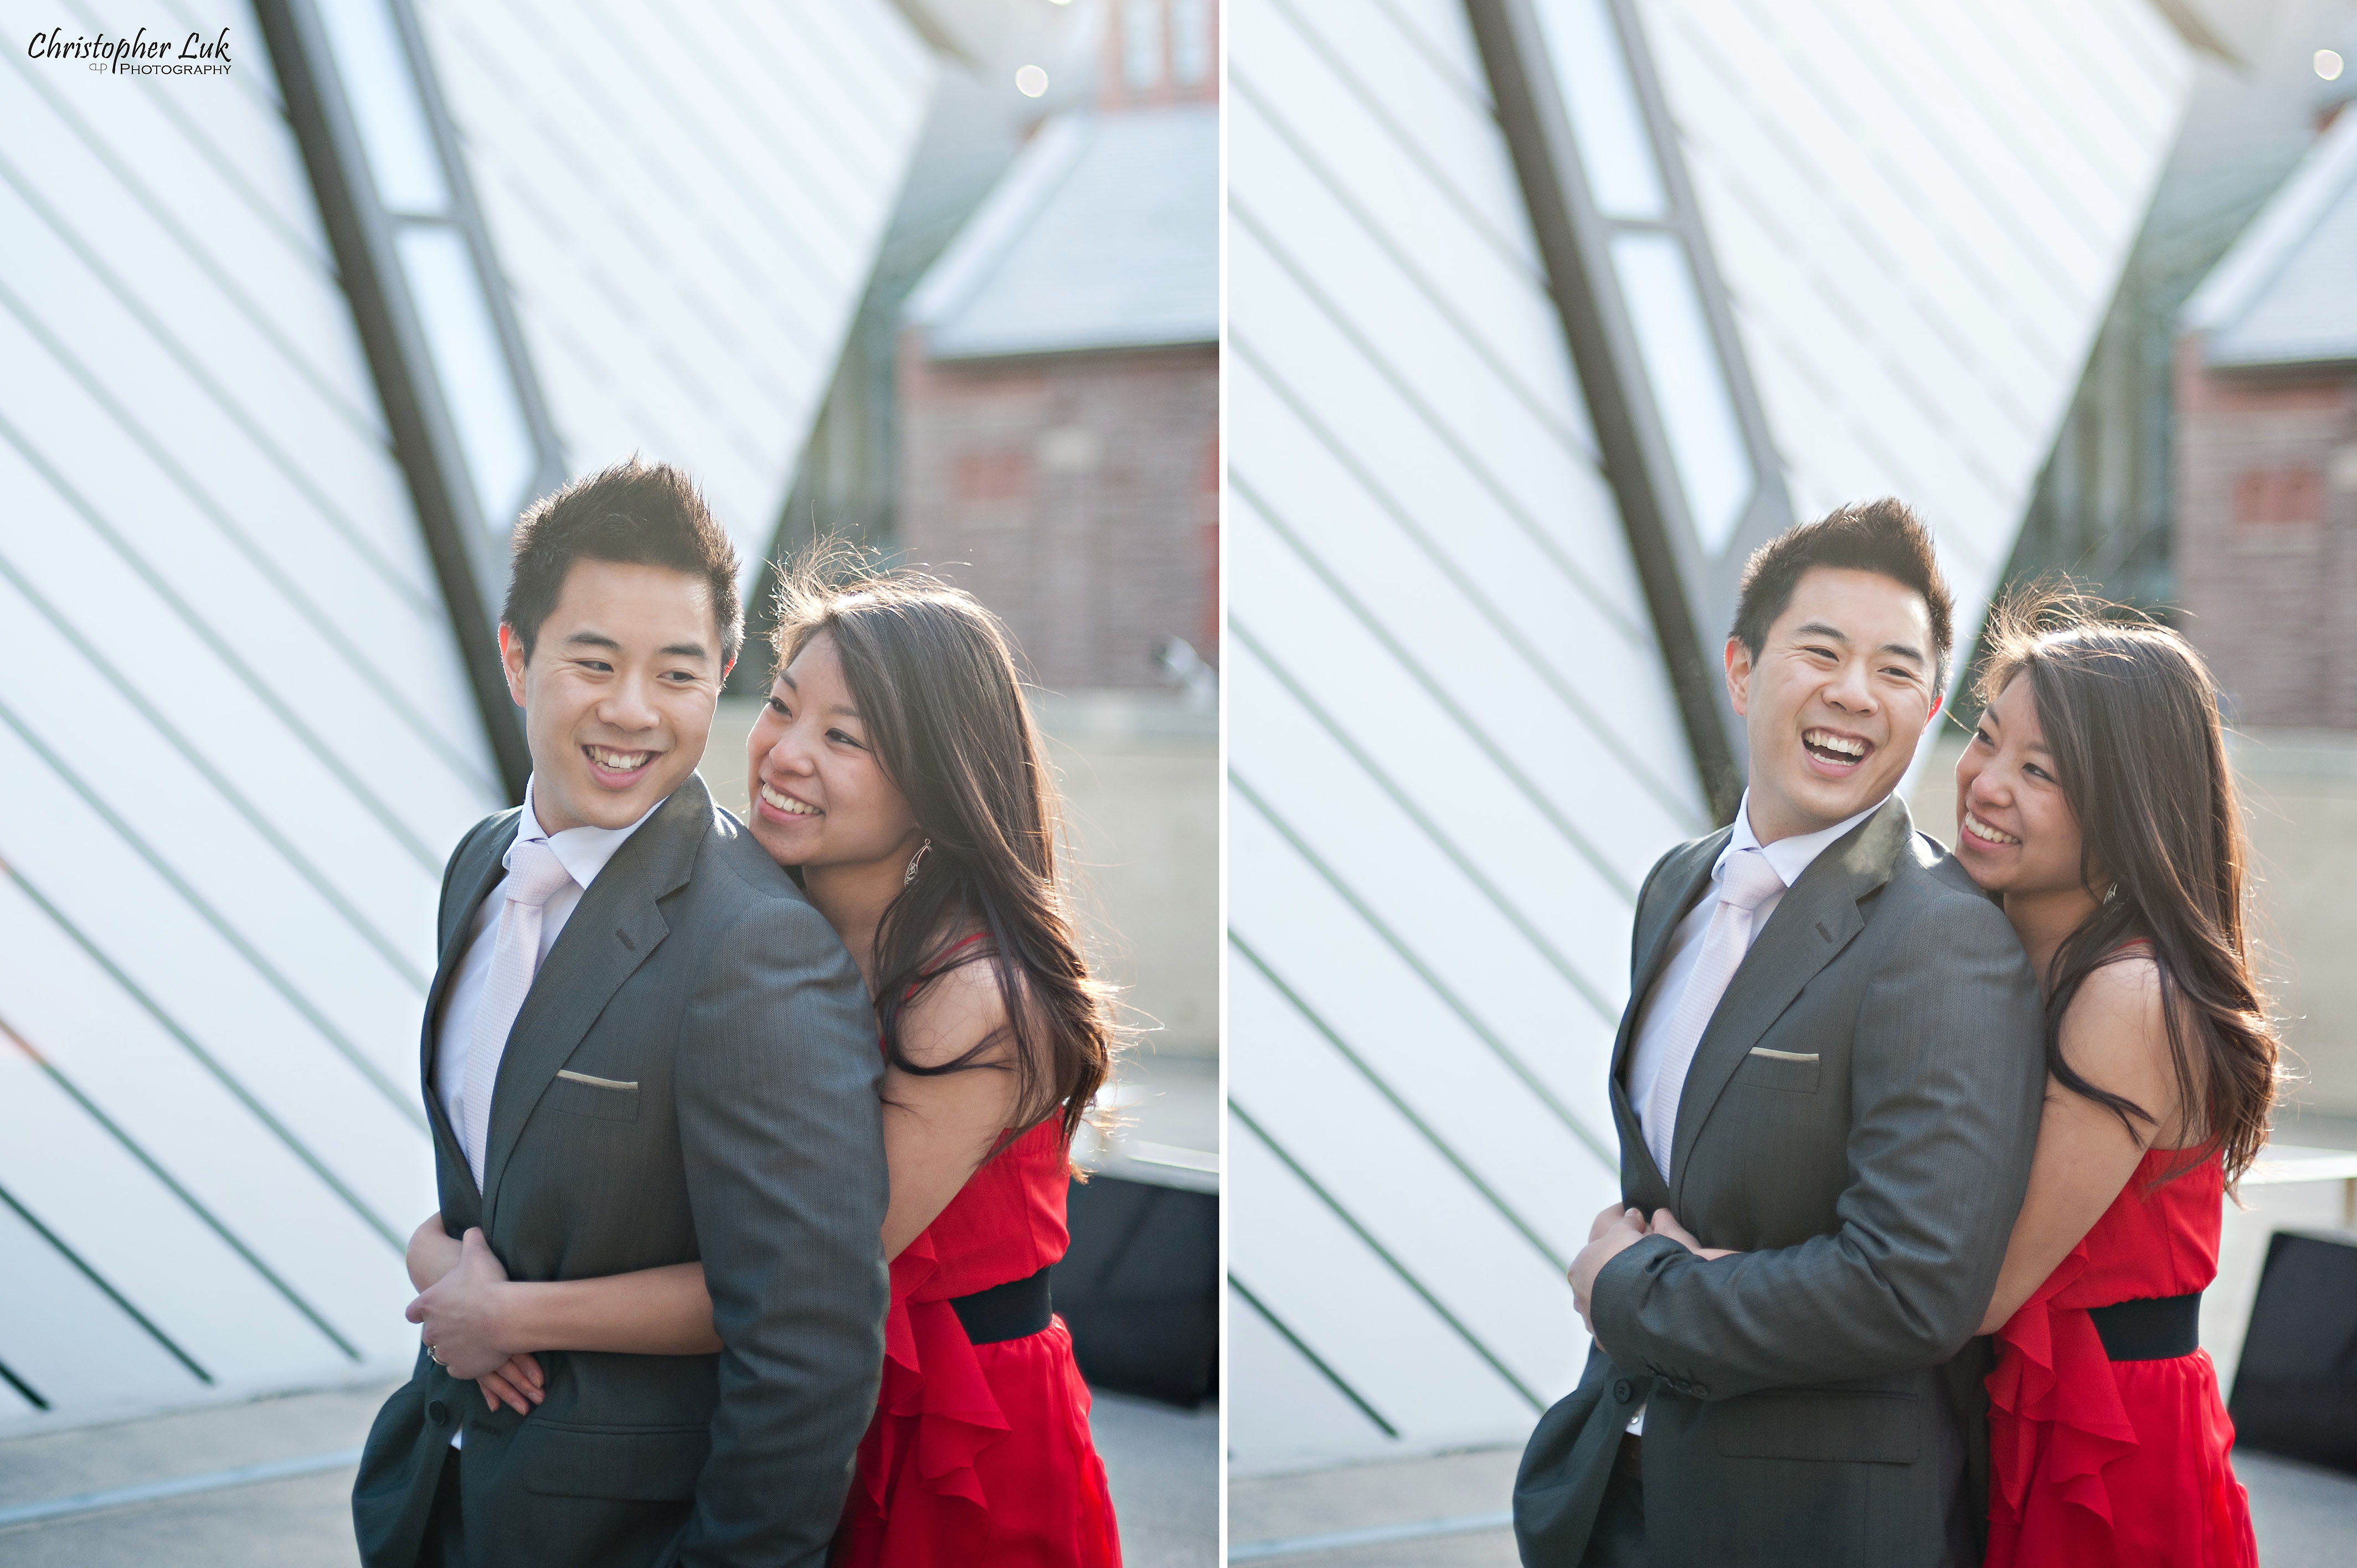 Christopher Luk Engagement Session 2012 - Erin and Brian - Toronto Wedding Photographer Downtown Royal Ontario Museum - Casual Relaxed Candid Photojournalistic Photojournalism Portraits